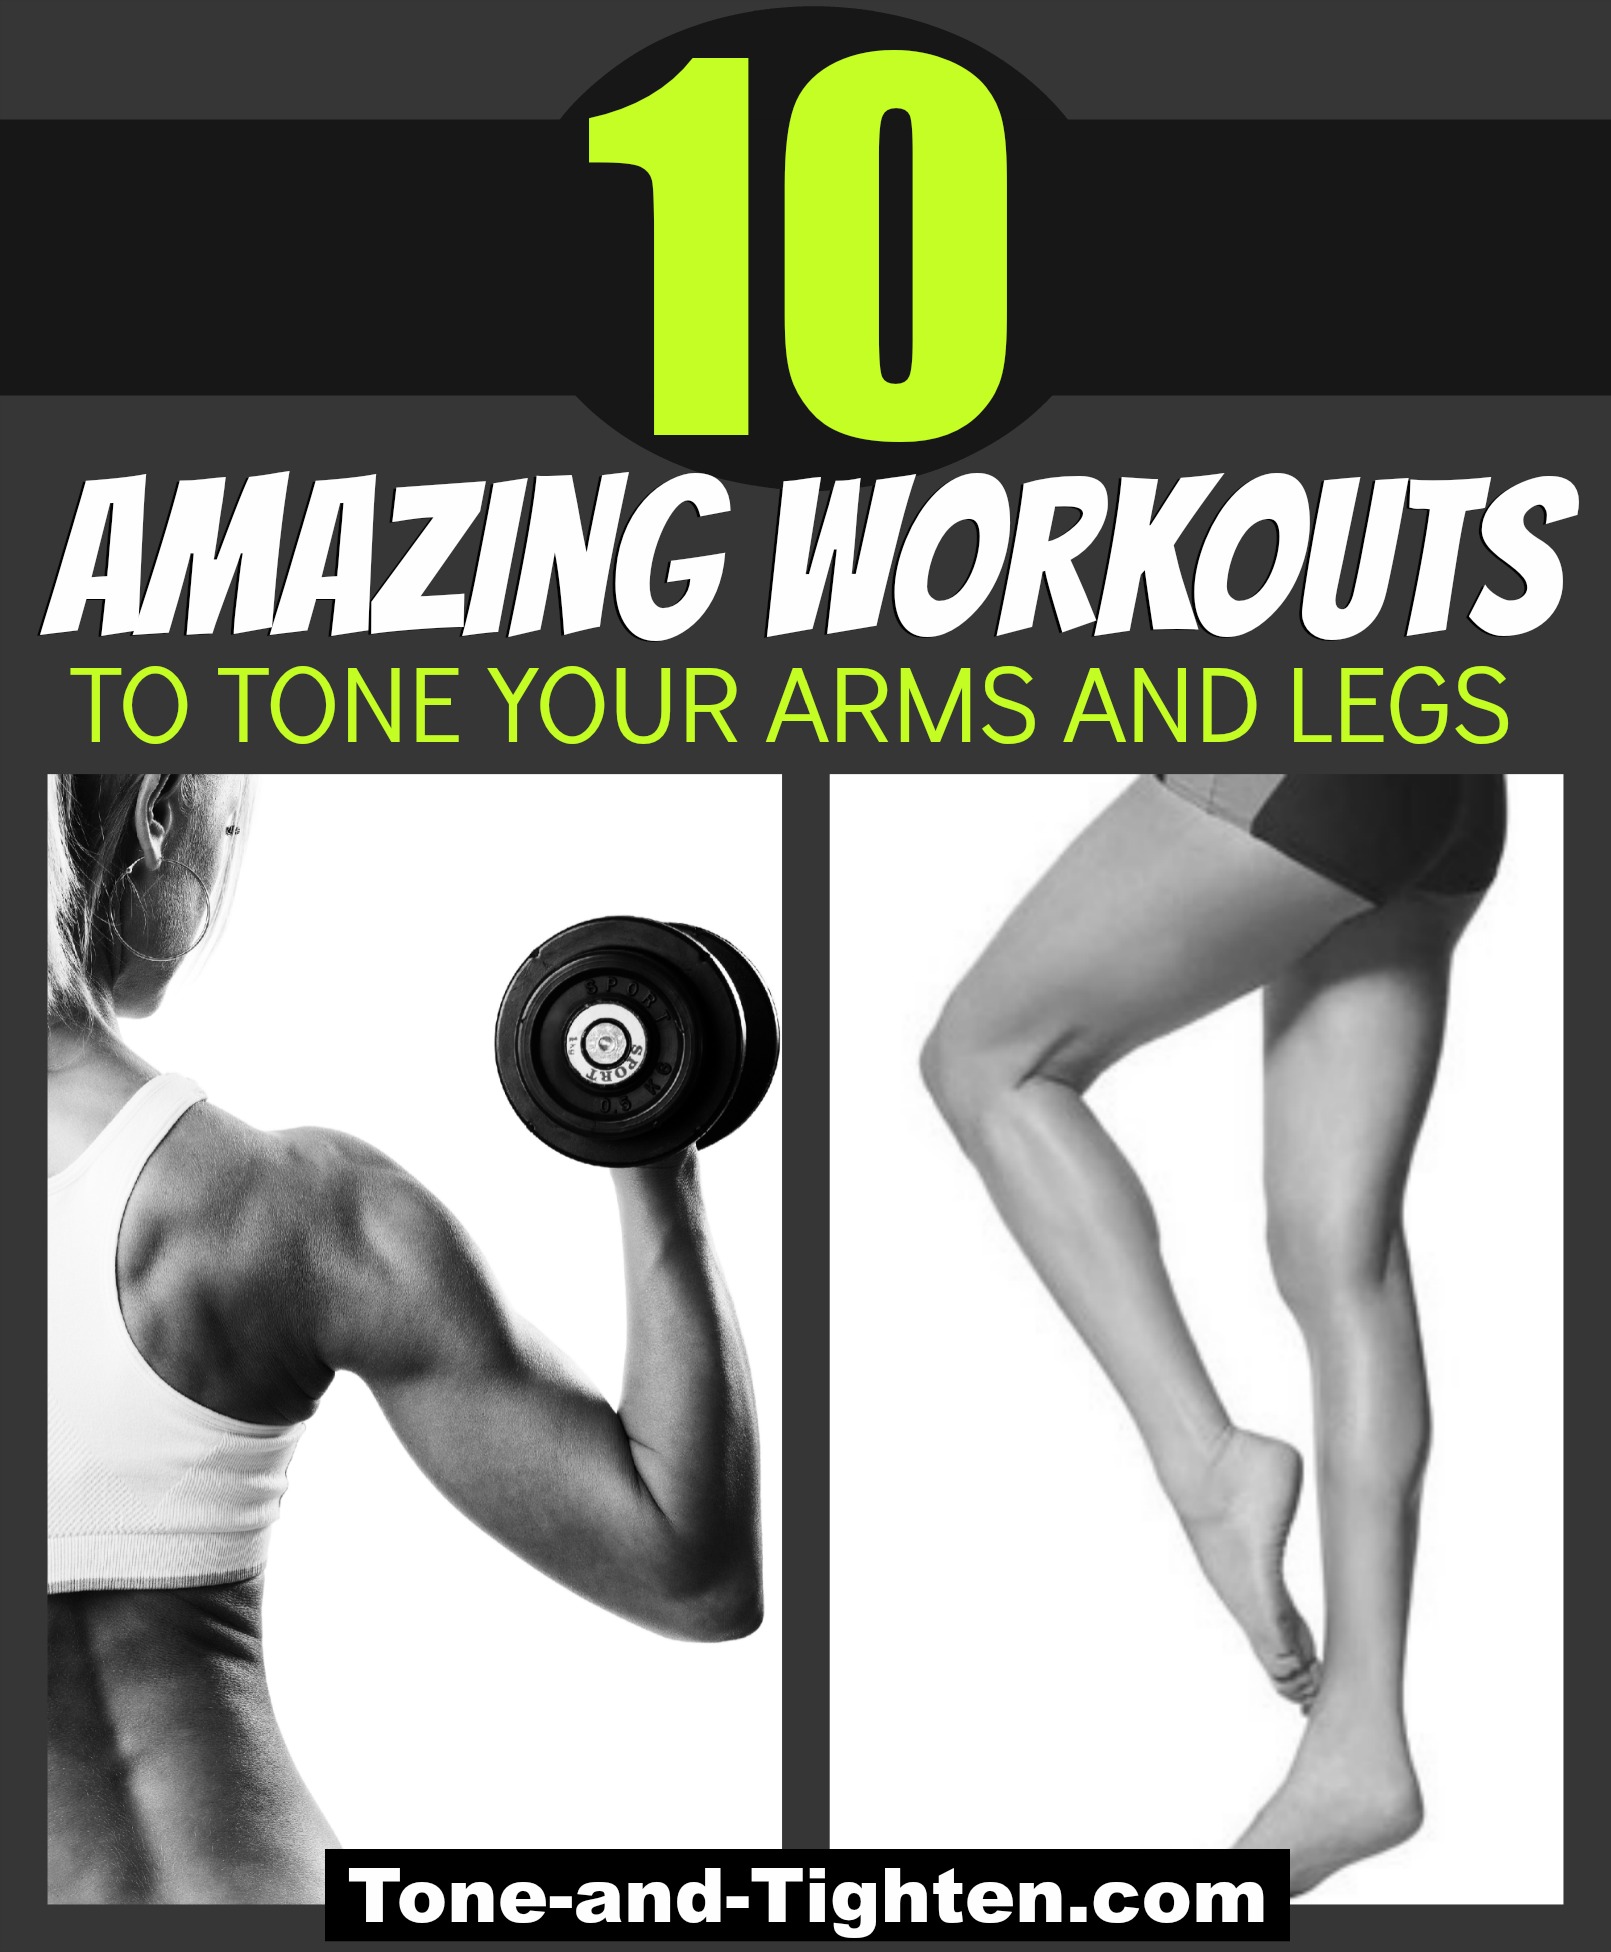 10 of the best workouts to tone and tighten your arms and legs